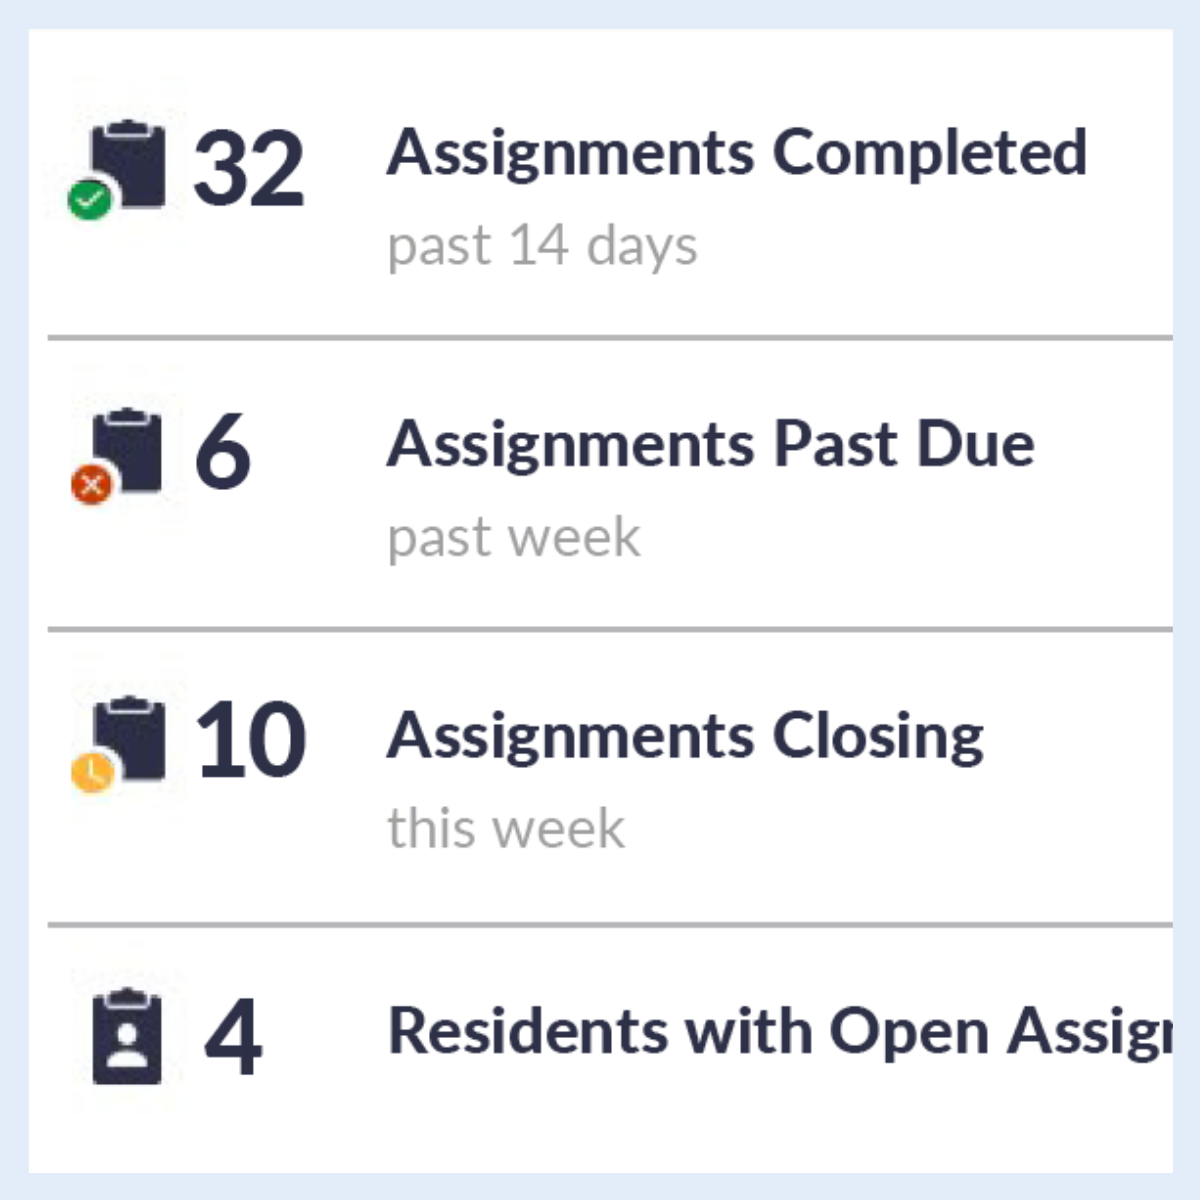 medcentral cropped close up of stats showing number of assignments and their statuses